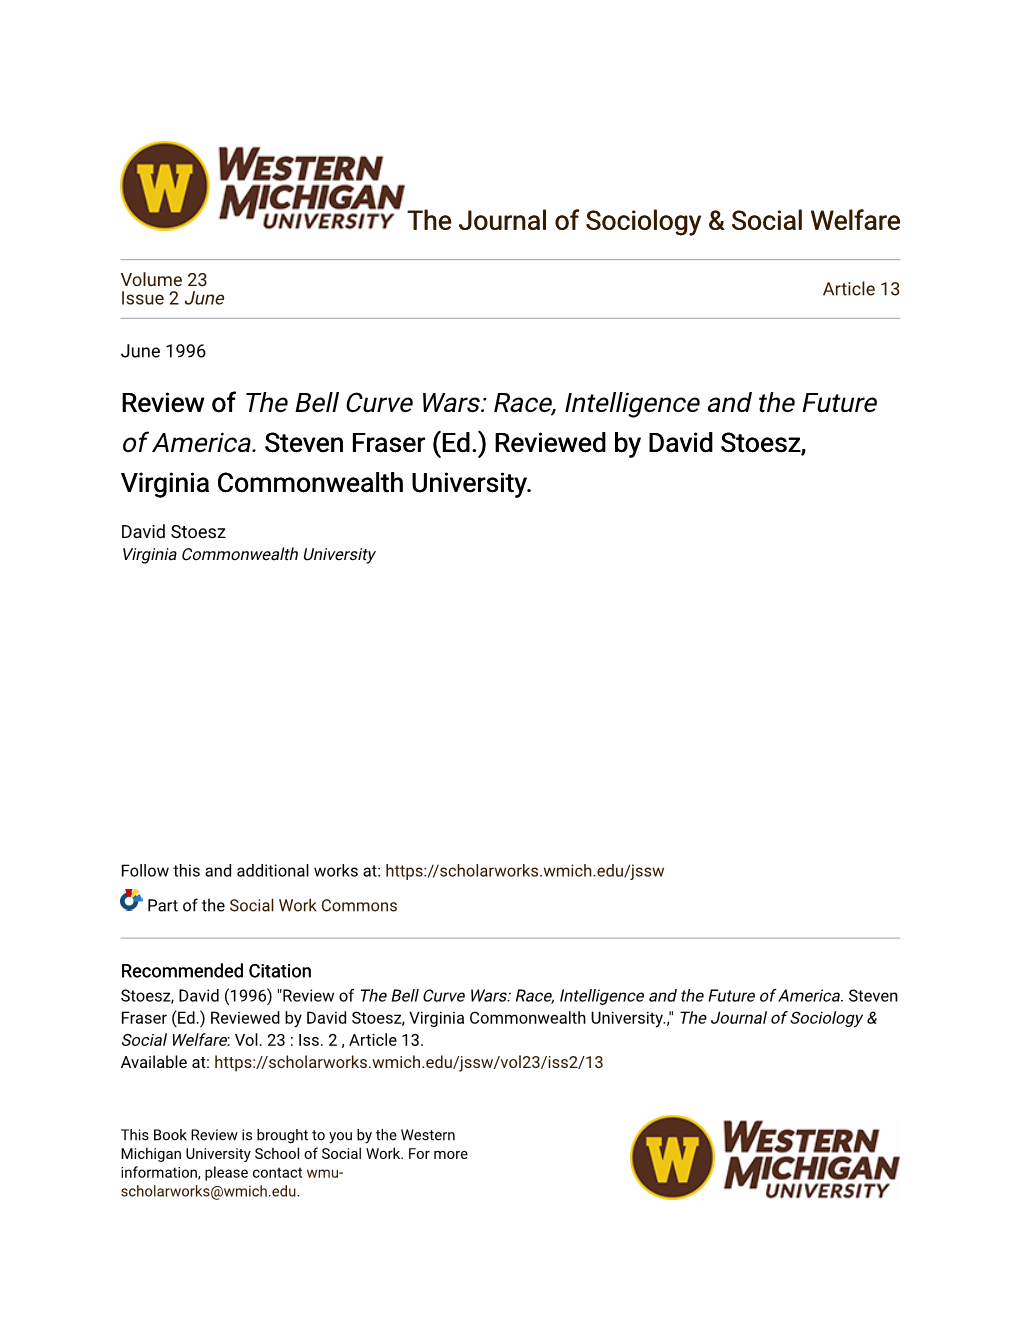 Review of Review of the Bell Curve Wars: Race, Intelligence and The